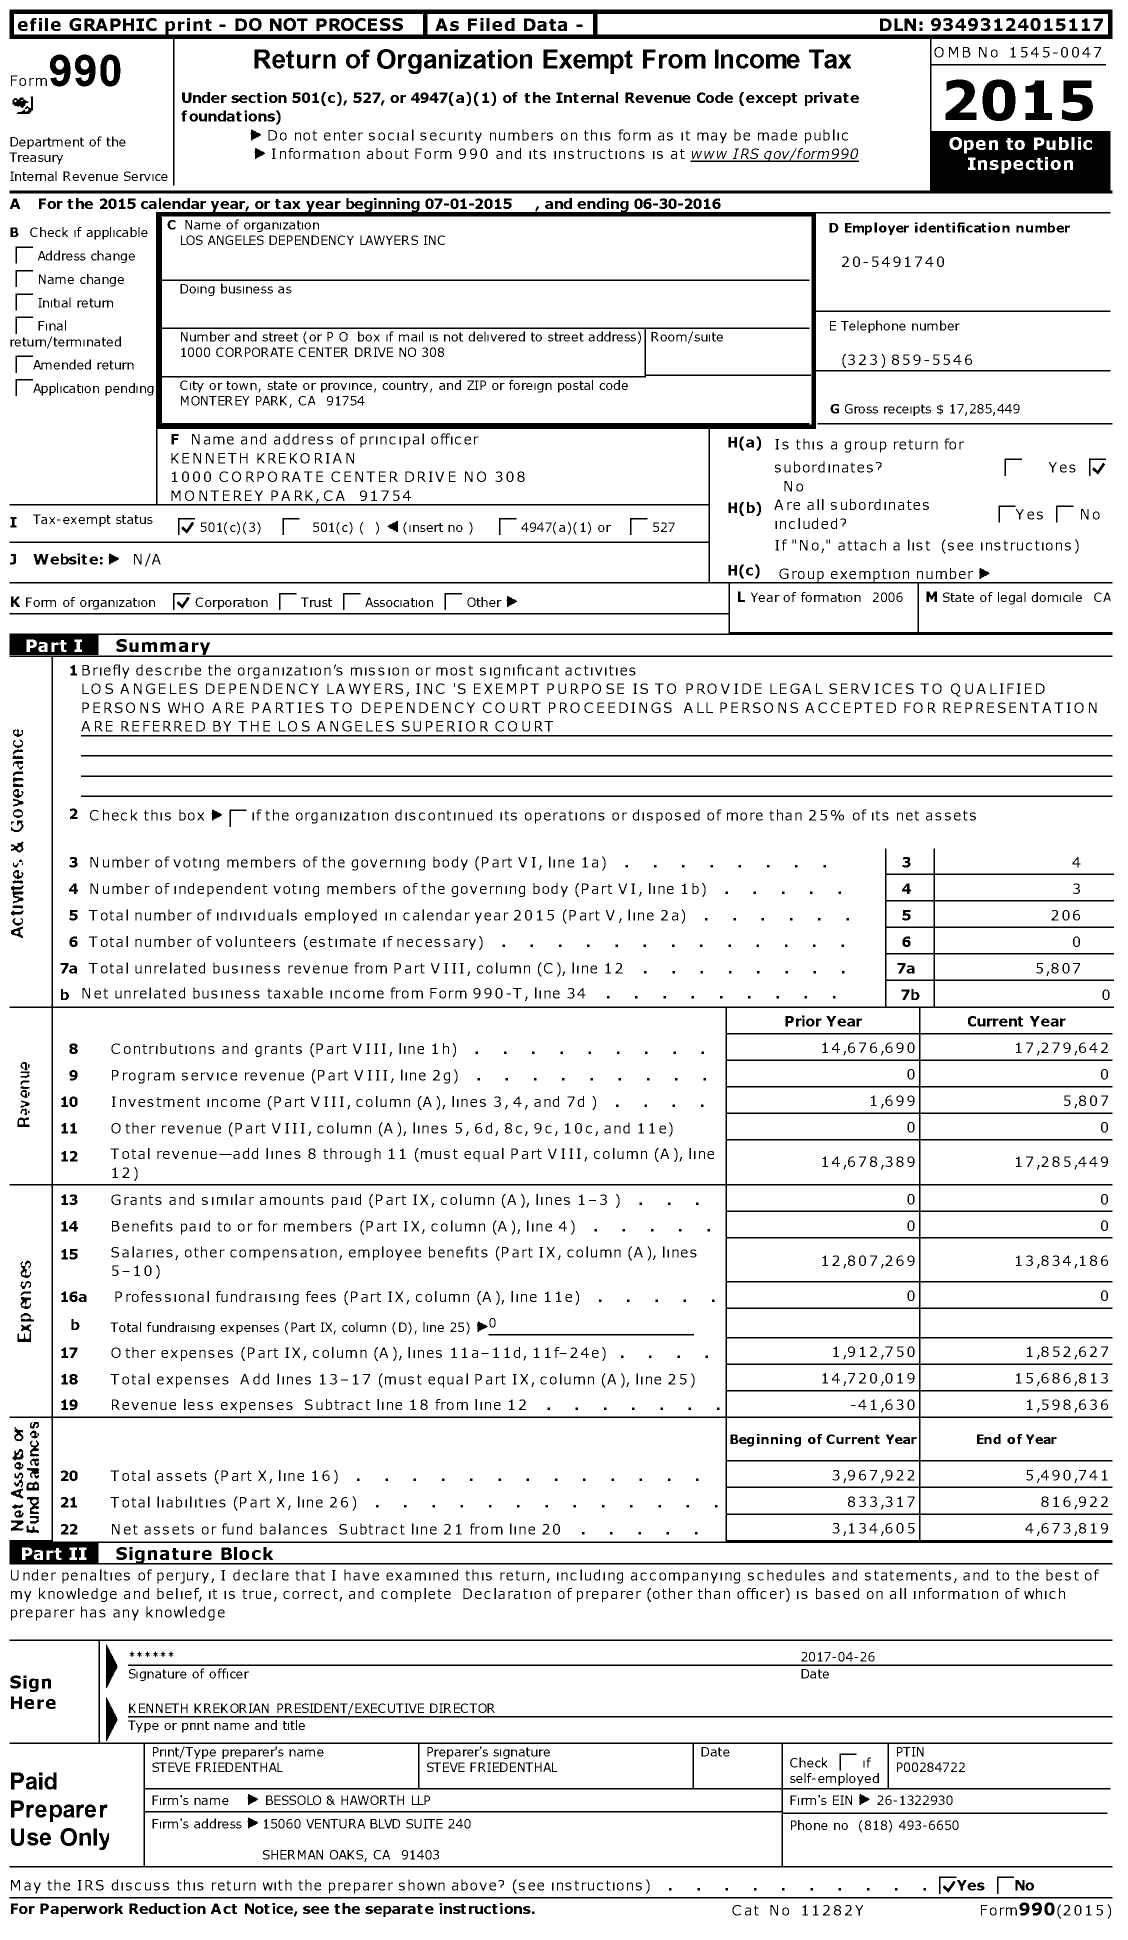 Image of first page of 2015 Form 990 for Los Angeles Dependency Lawyers (LADL)